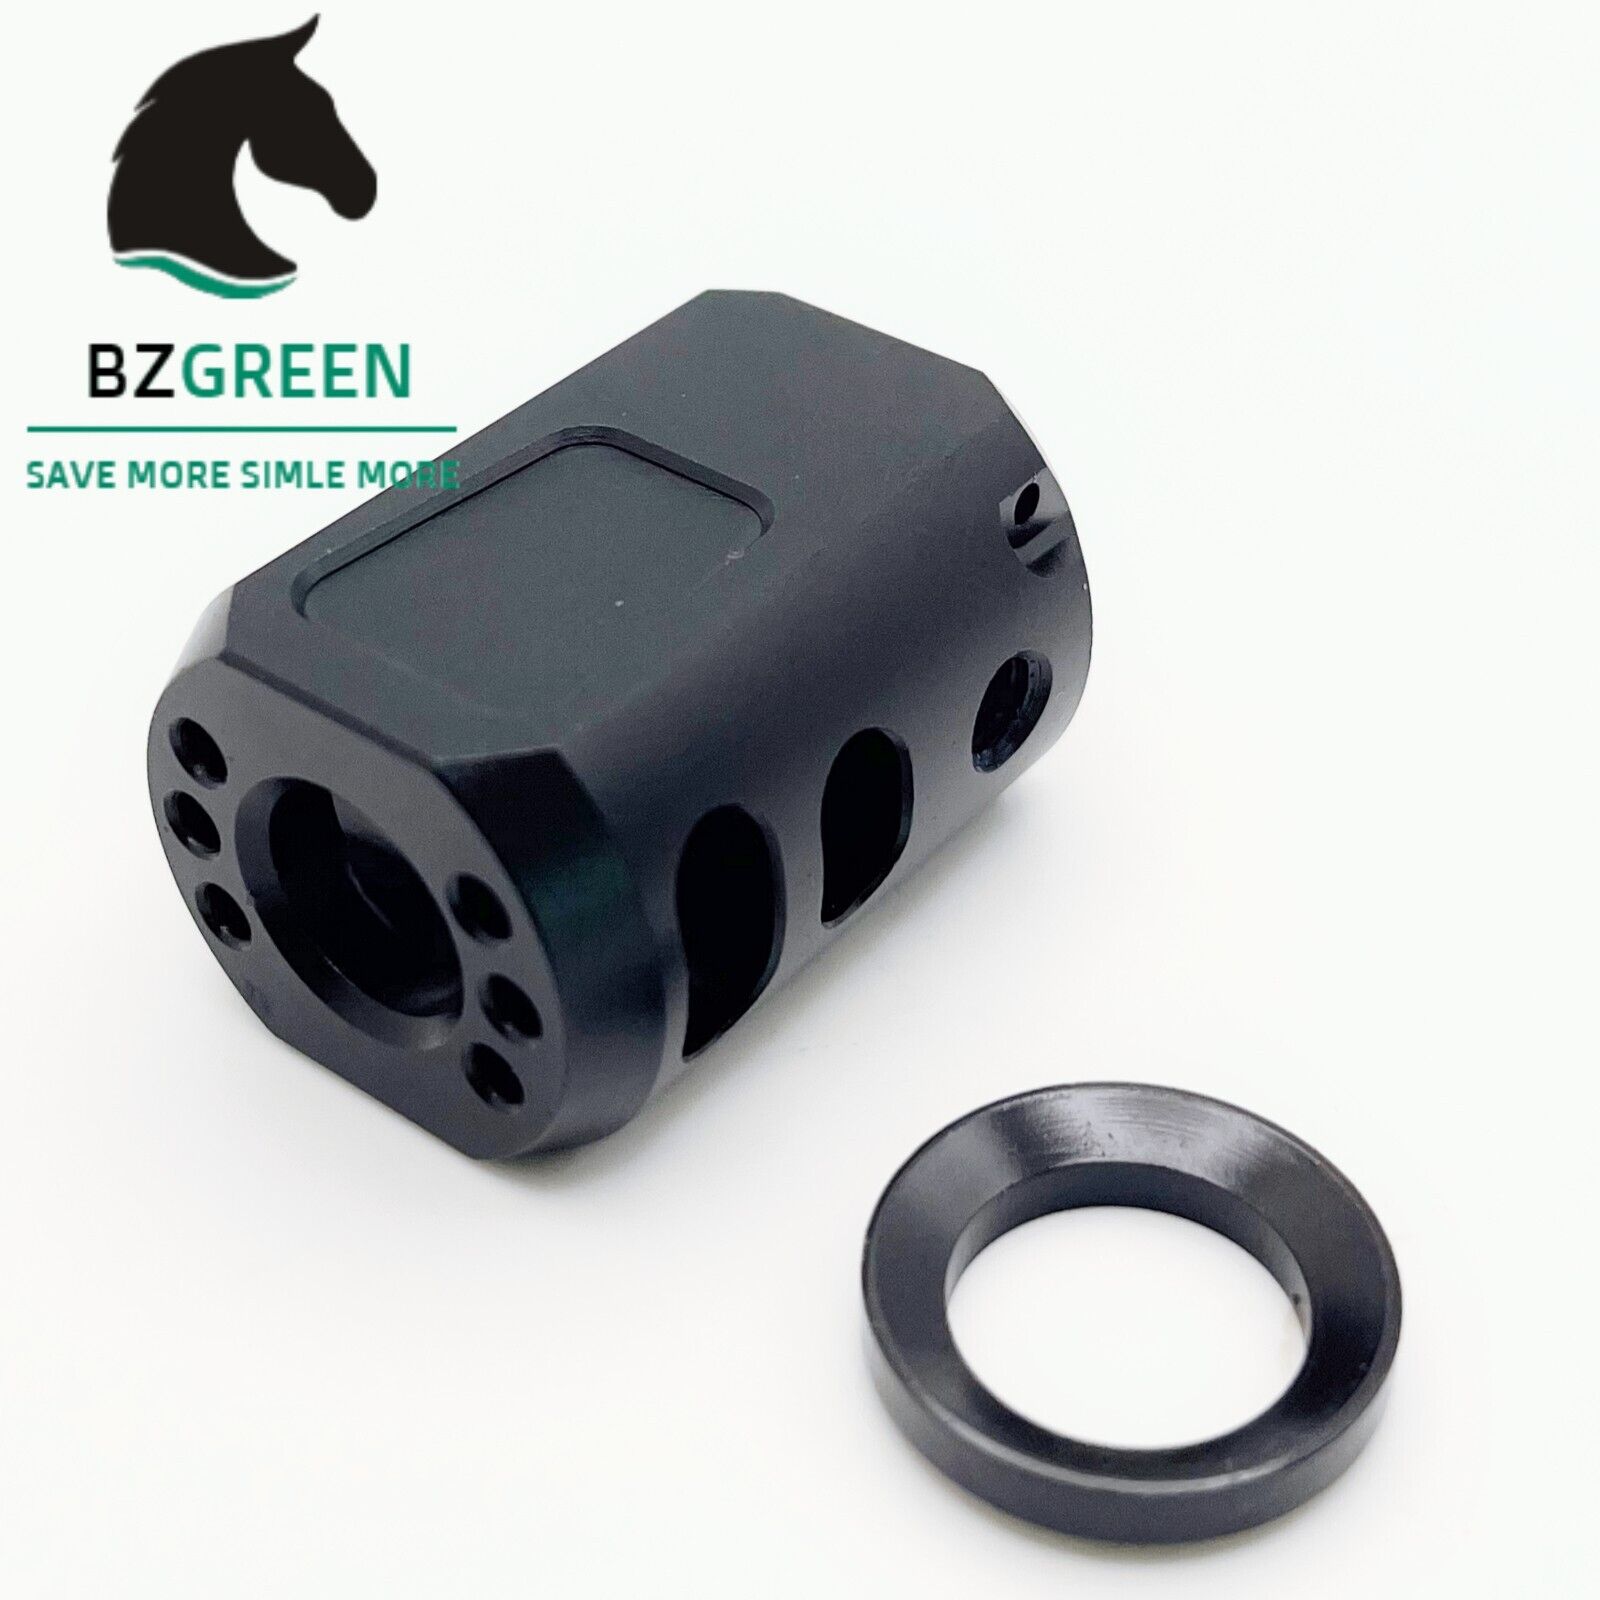 Top Flat 1/2×28 Thread Muzzle Brake Anodized For 9mm Glock Free Crush Washer